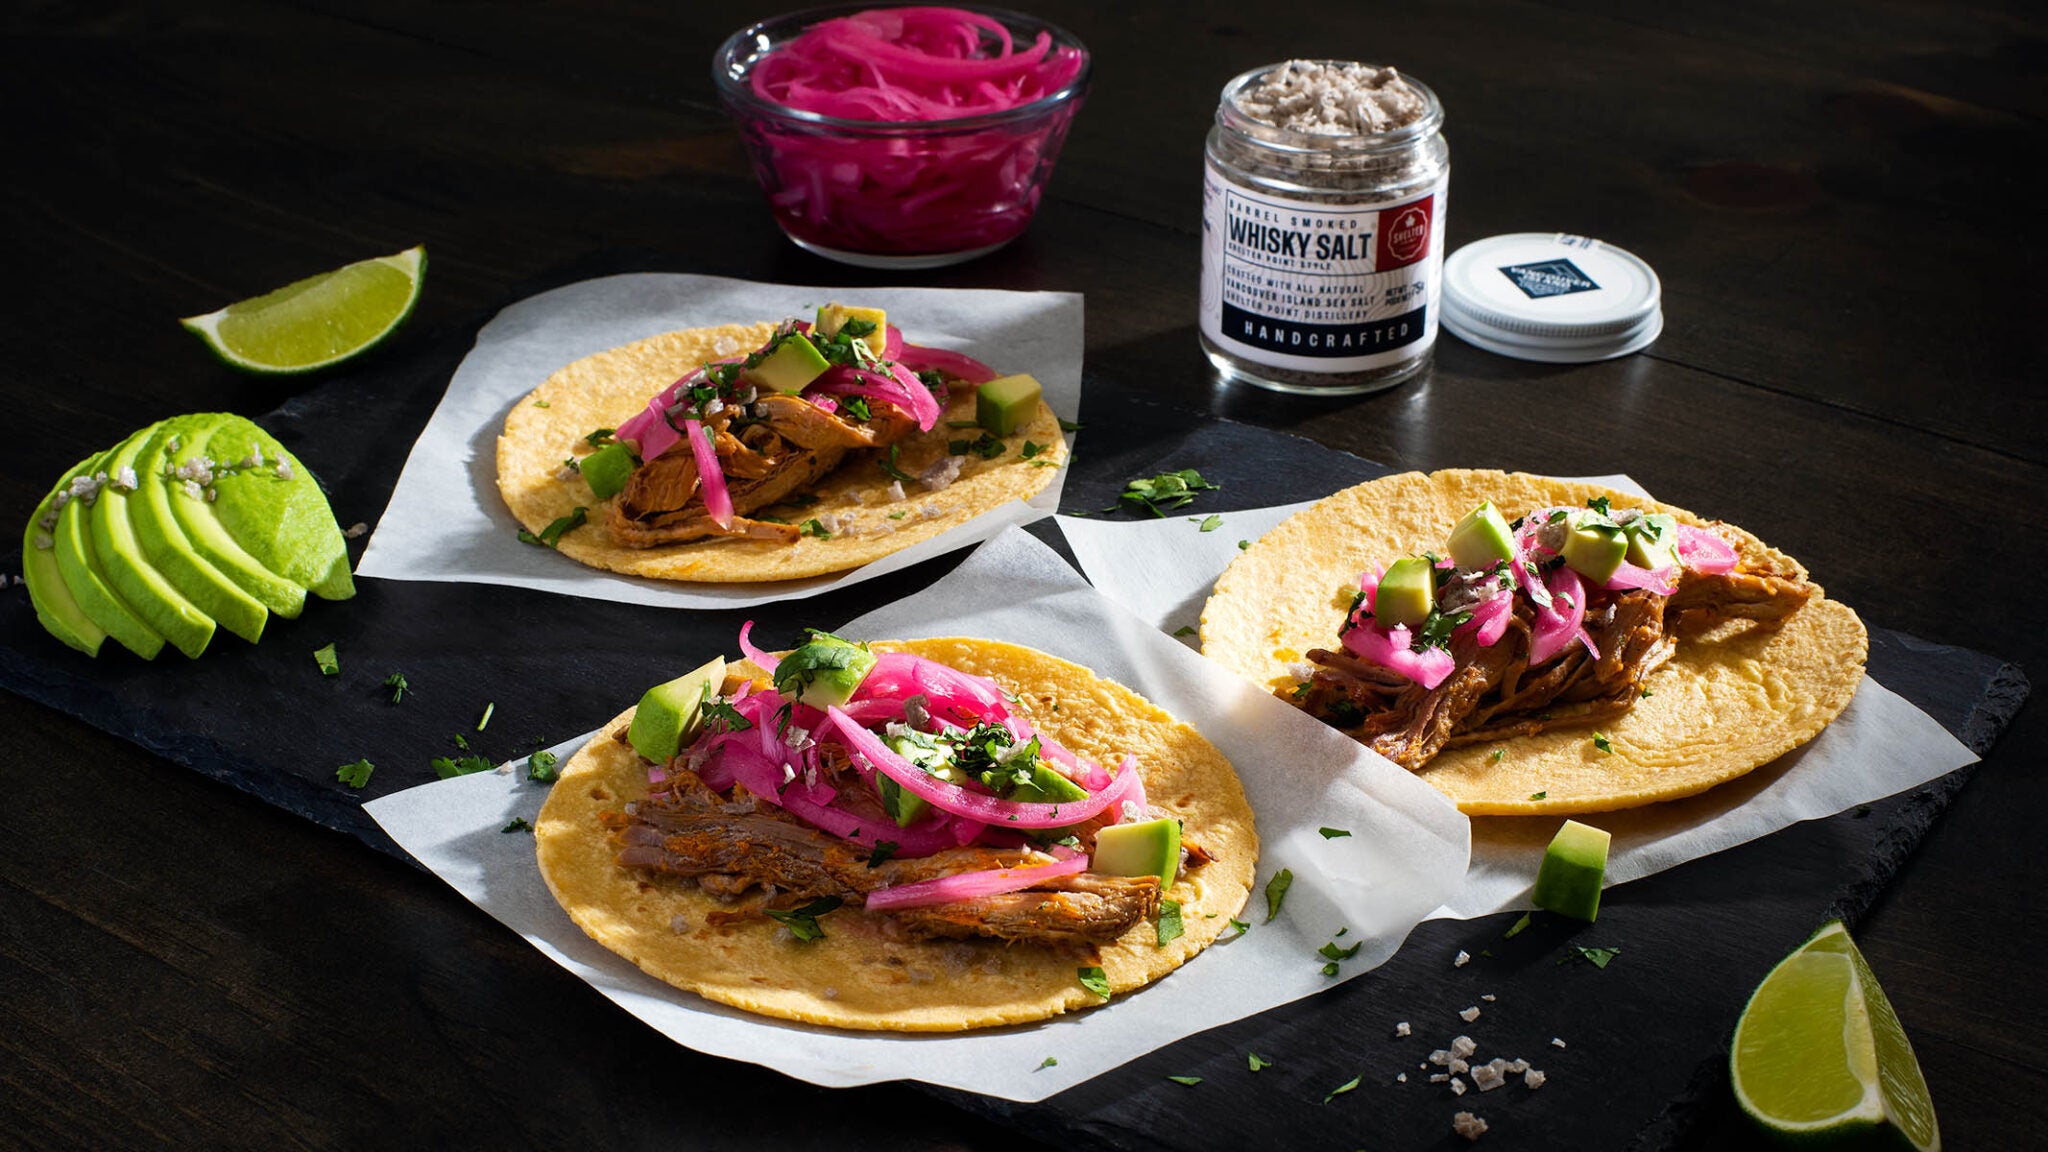 PULLED PORK CARNITAS WITH PICKLED ONIONS